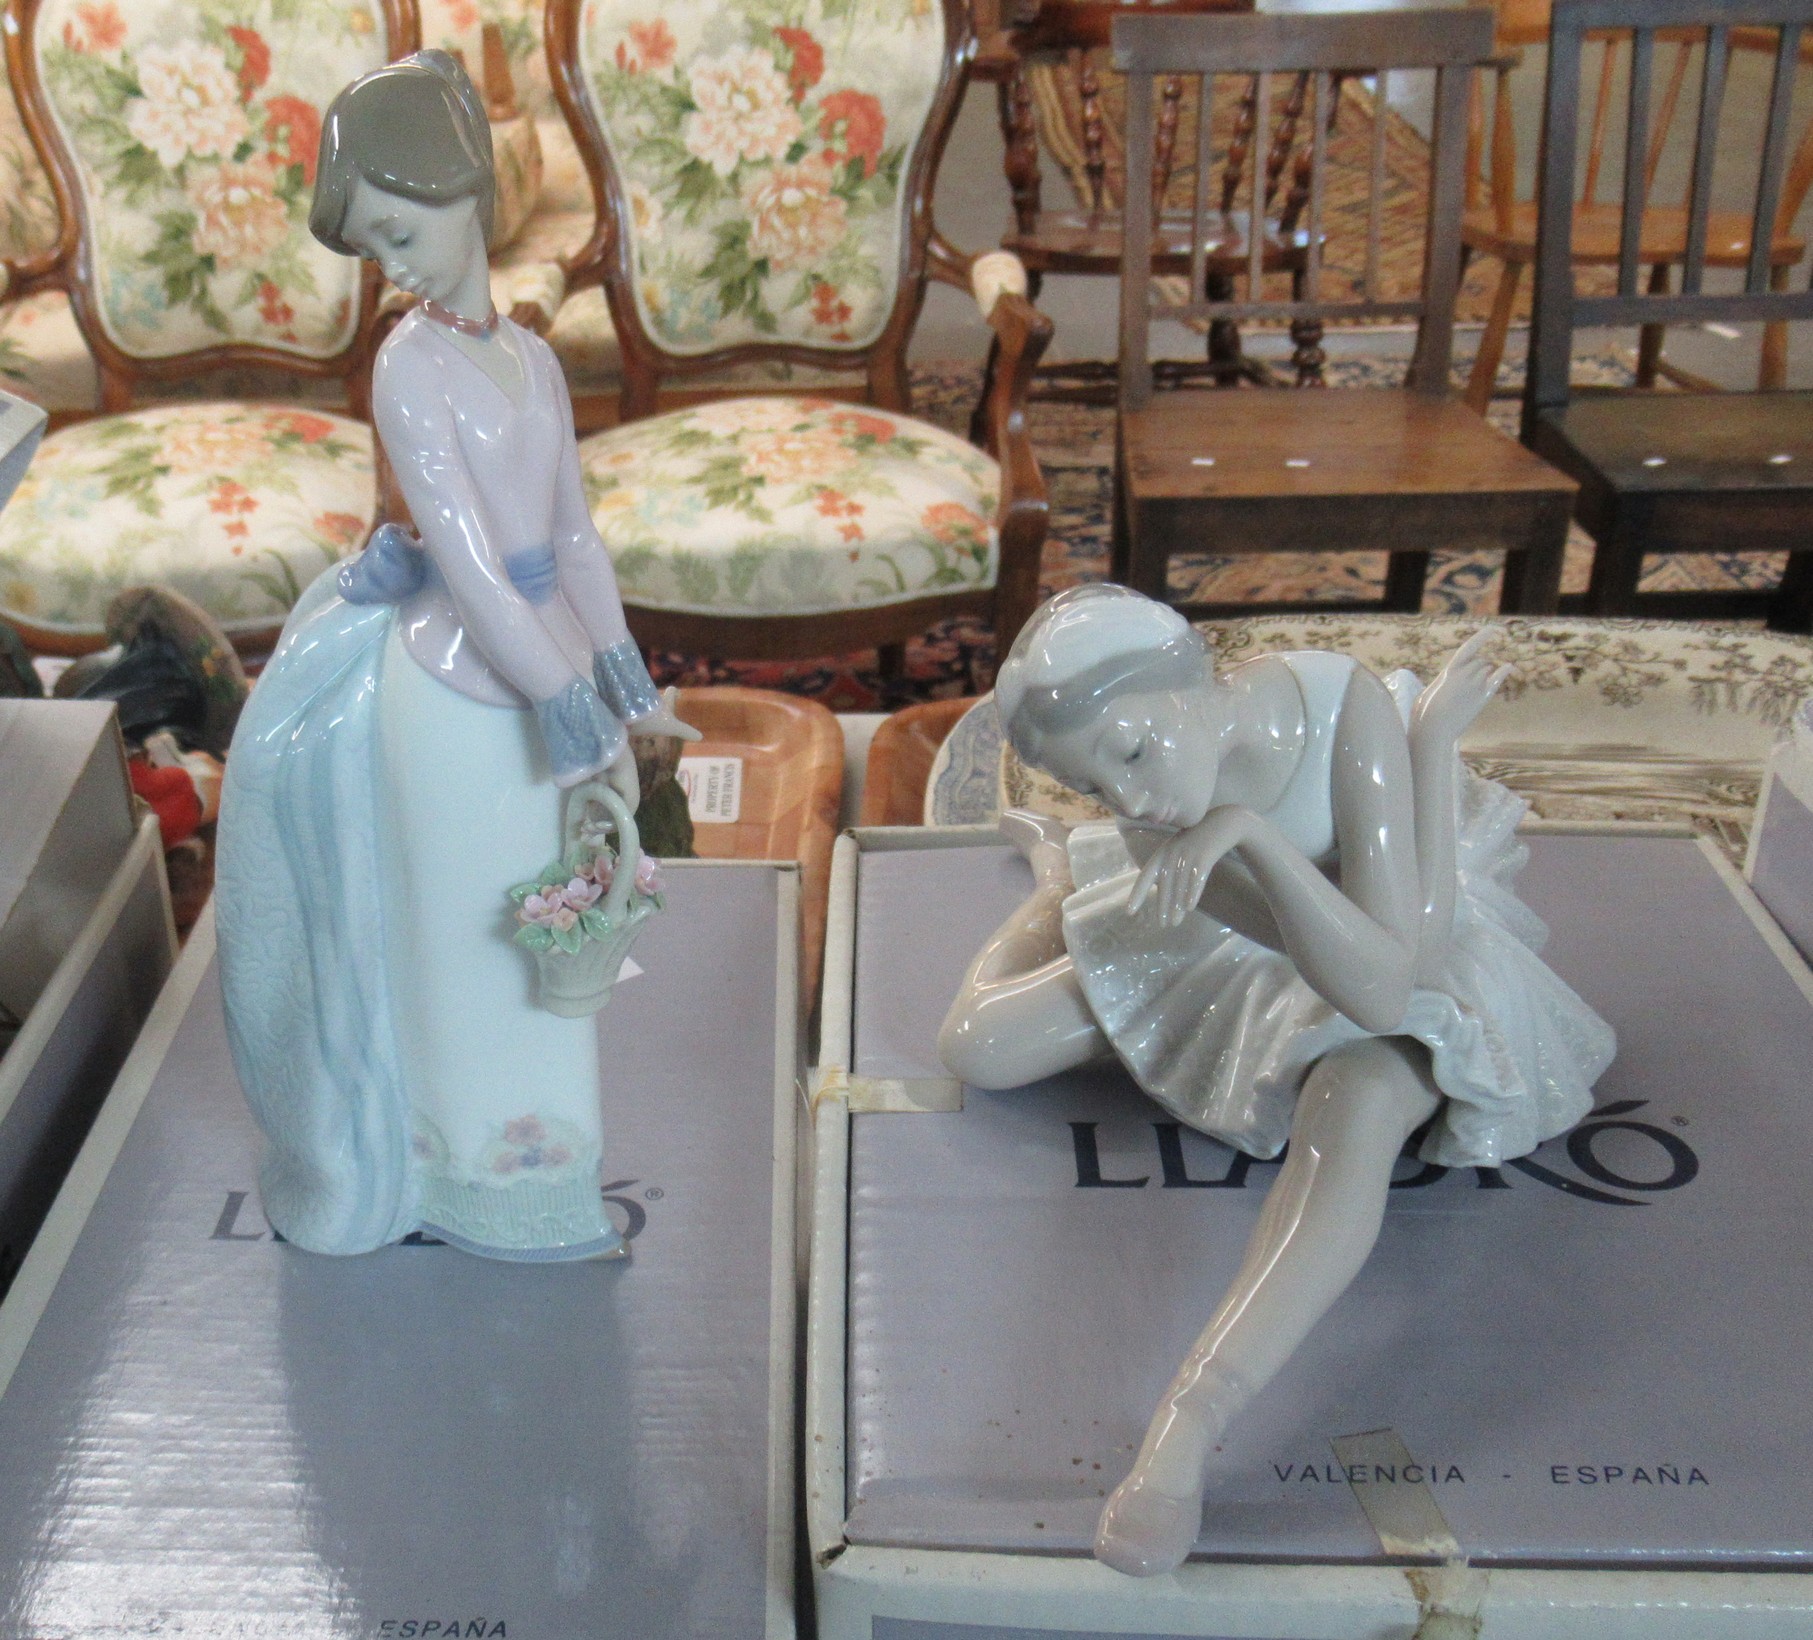 5 Lladro figurines in original boxes, to include: 'Basket of Love', 'Innocence in Bloom', 'Let's